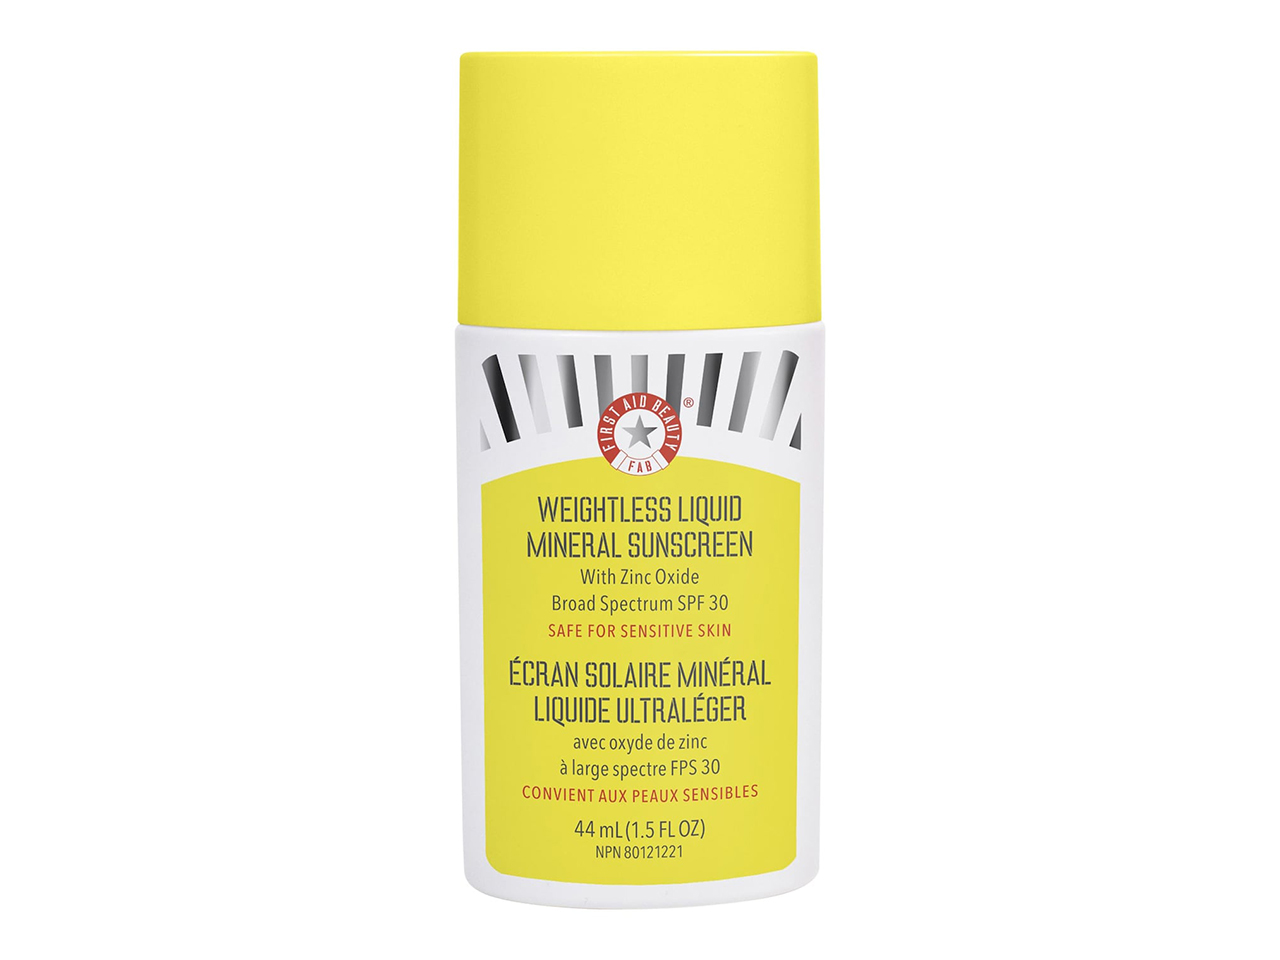 A white bottle with a yellow cap of First Aid Beauty Weightless Liquid Mineral Sunscreen with Zinc Oxide SPF 30 sunscreen.